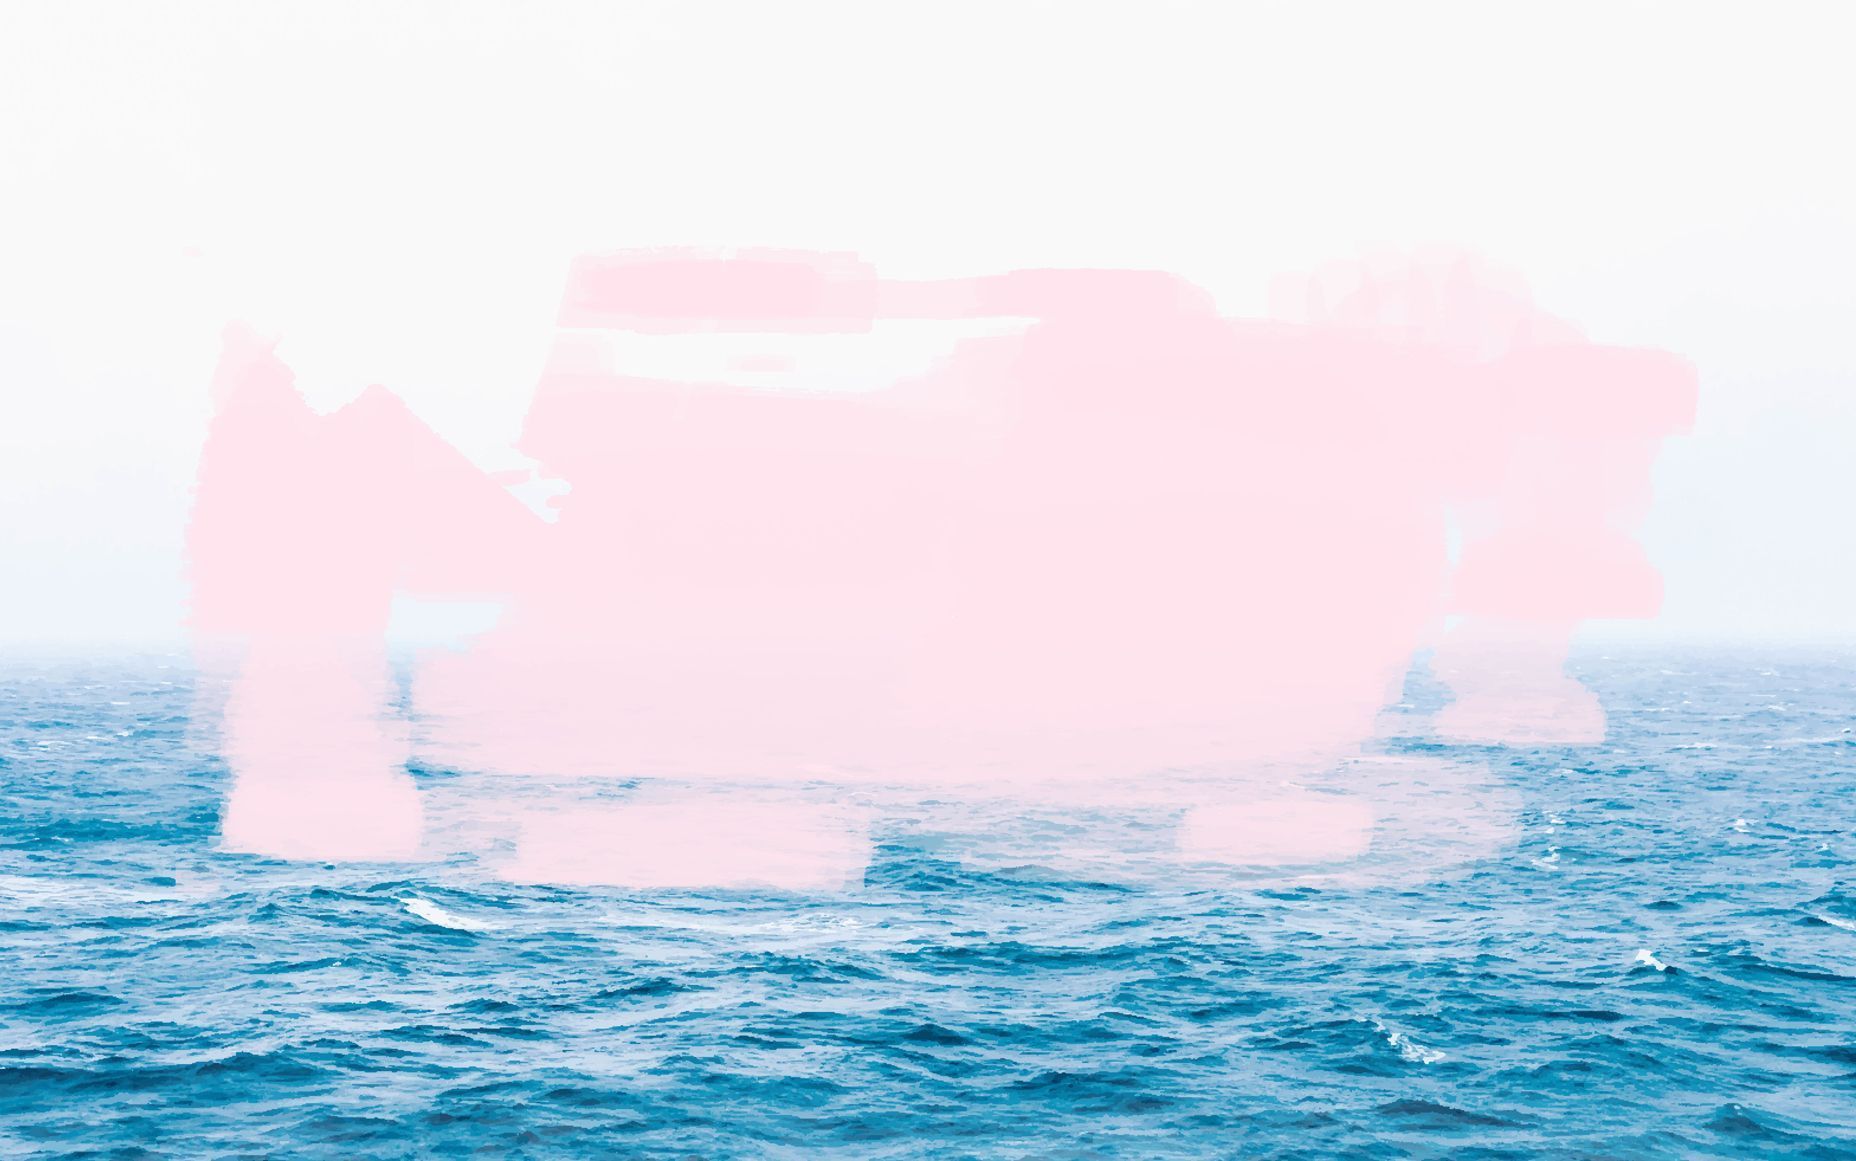 A painting of a blue sea with a pink smudge over the top - Calming